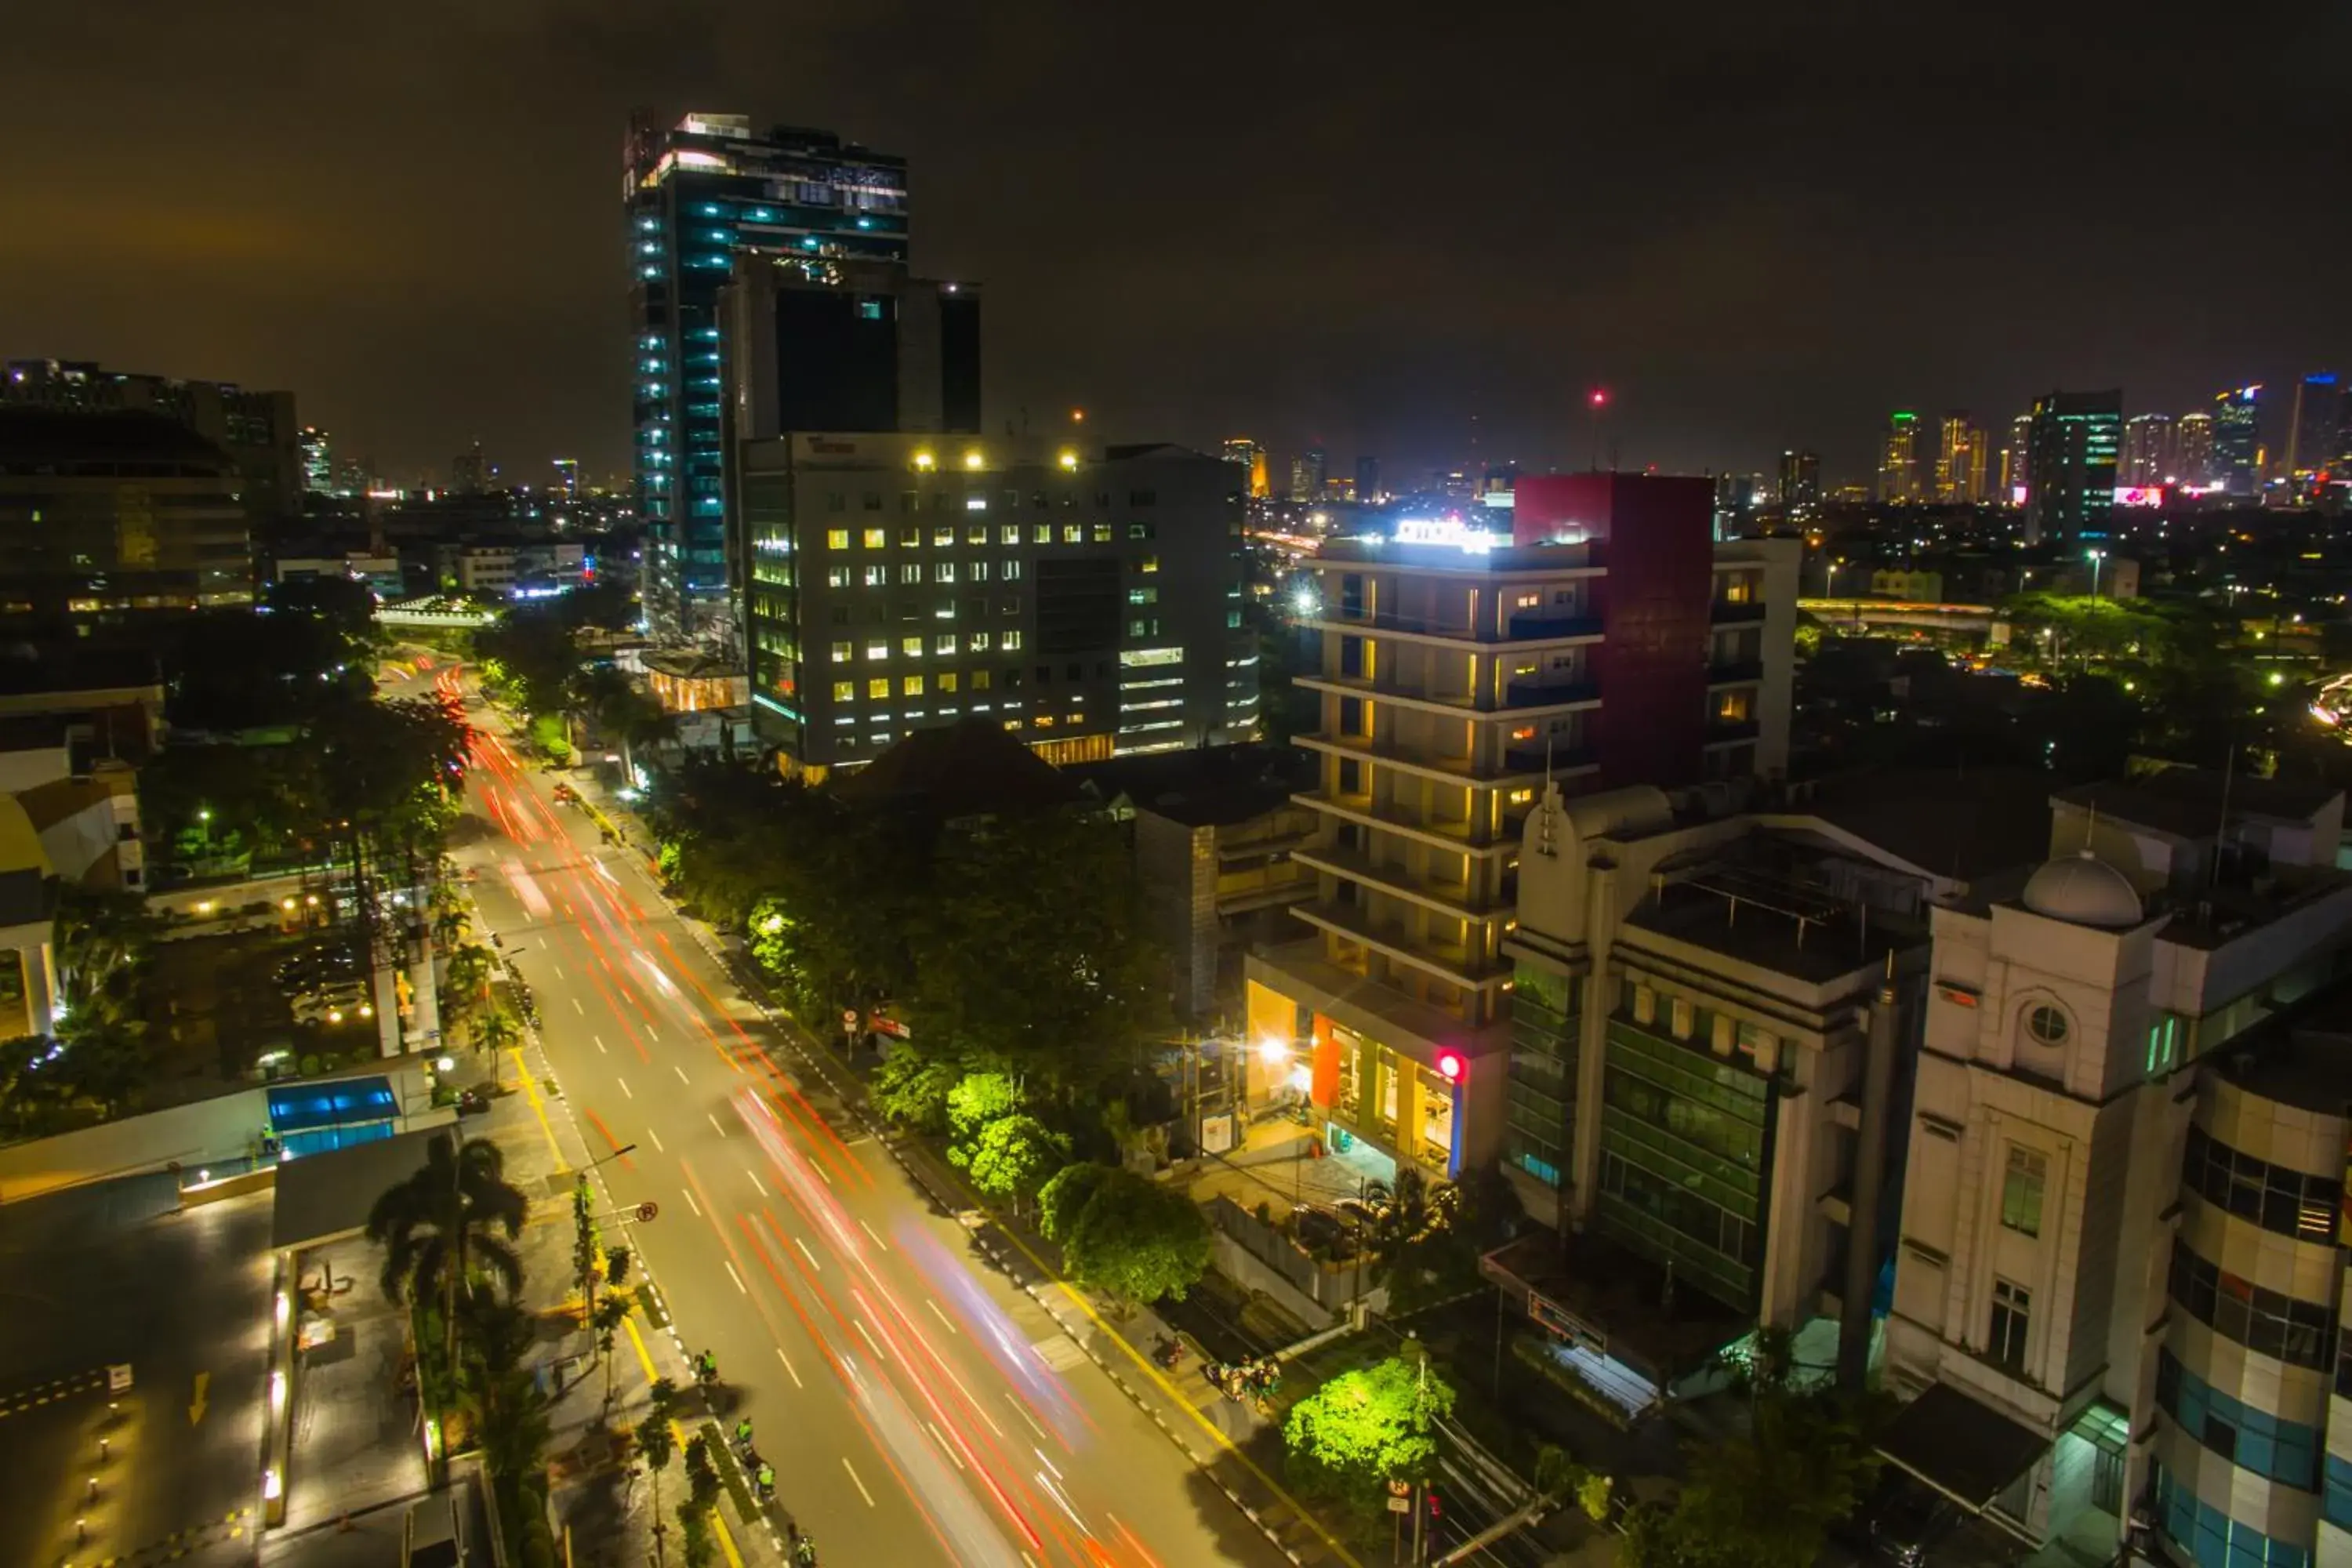 Street view, City View in Amaris Hotel Fachrudin - Tanah Abang